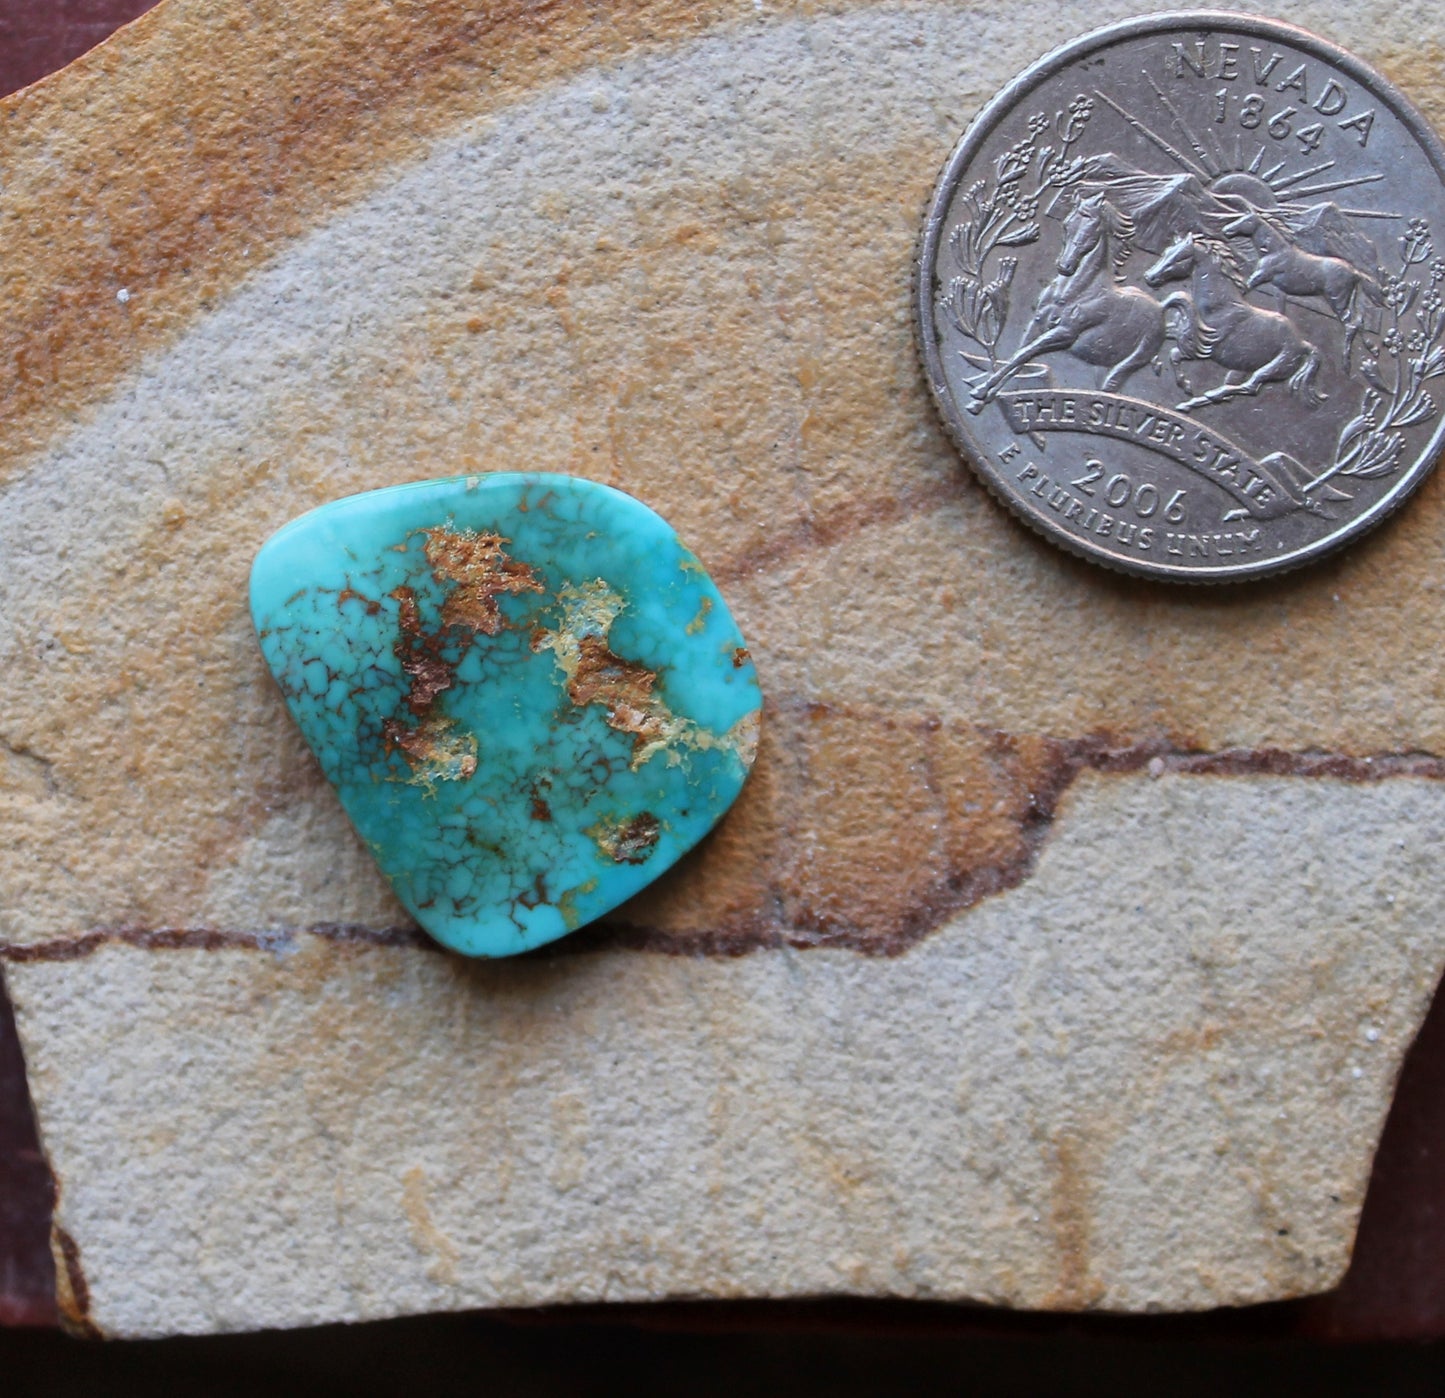 13 carat blue Stone Mountain Turquoise cabochon with red matrix